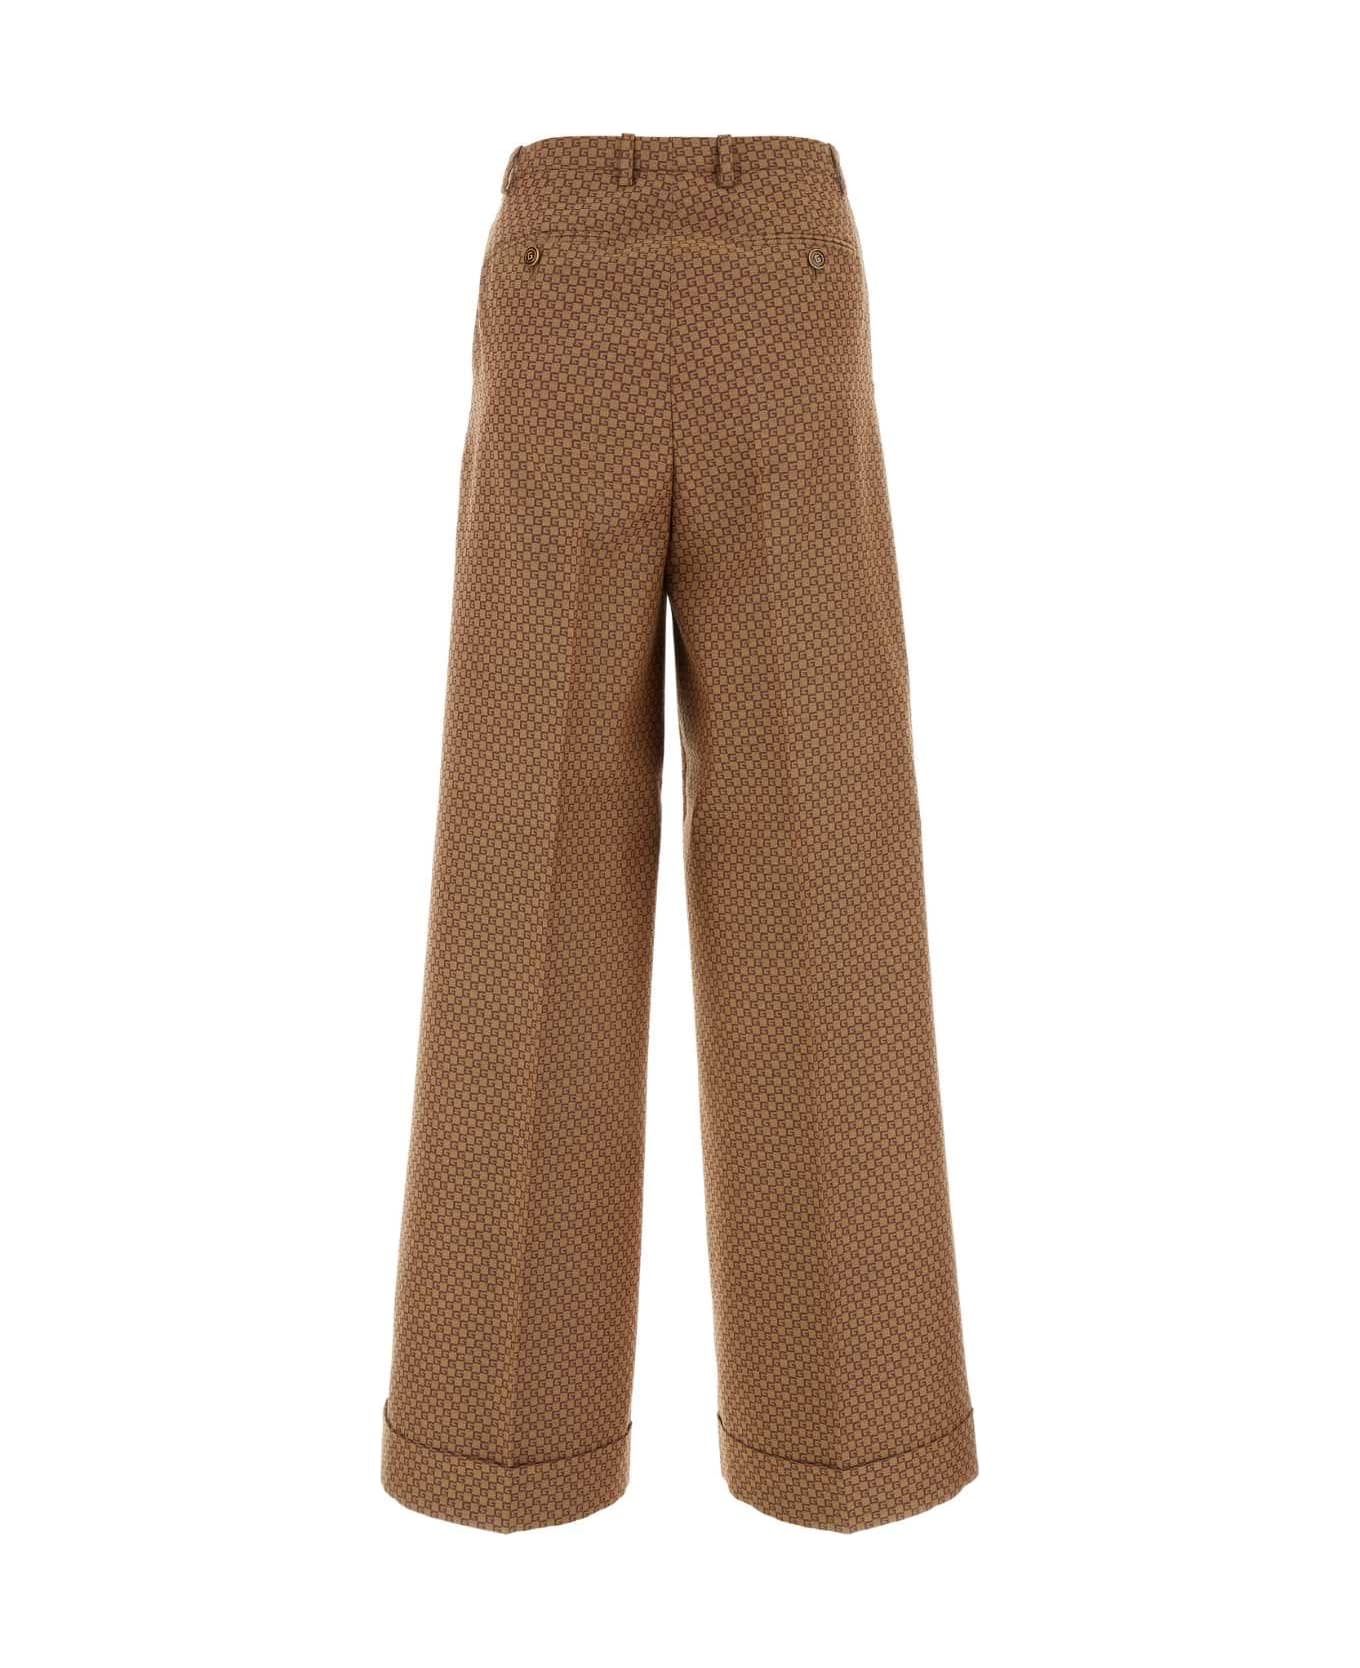 Gucci Embroidered Polyester Blend Pant - BEIGEBROWN